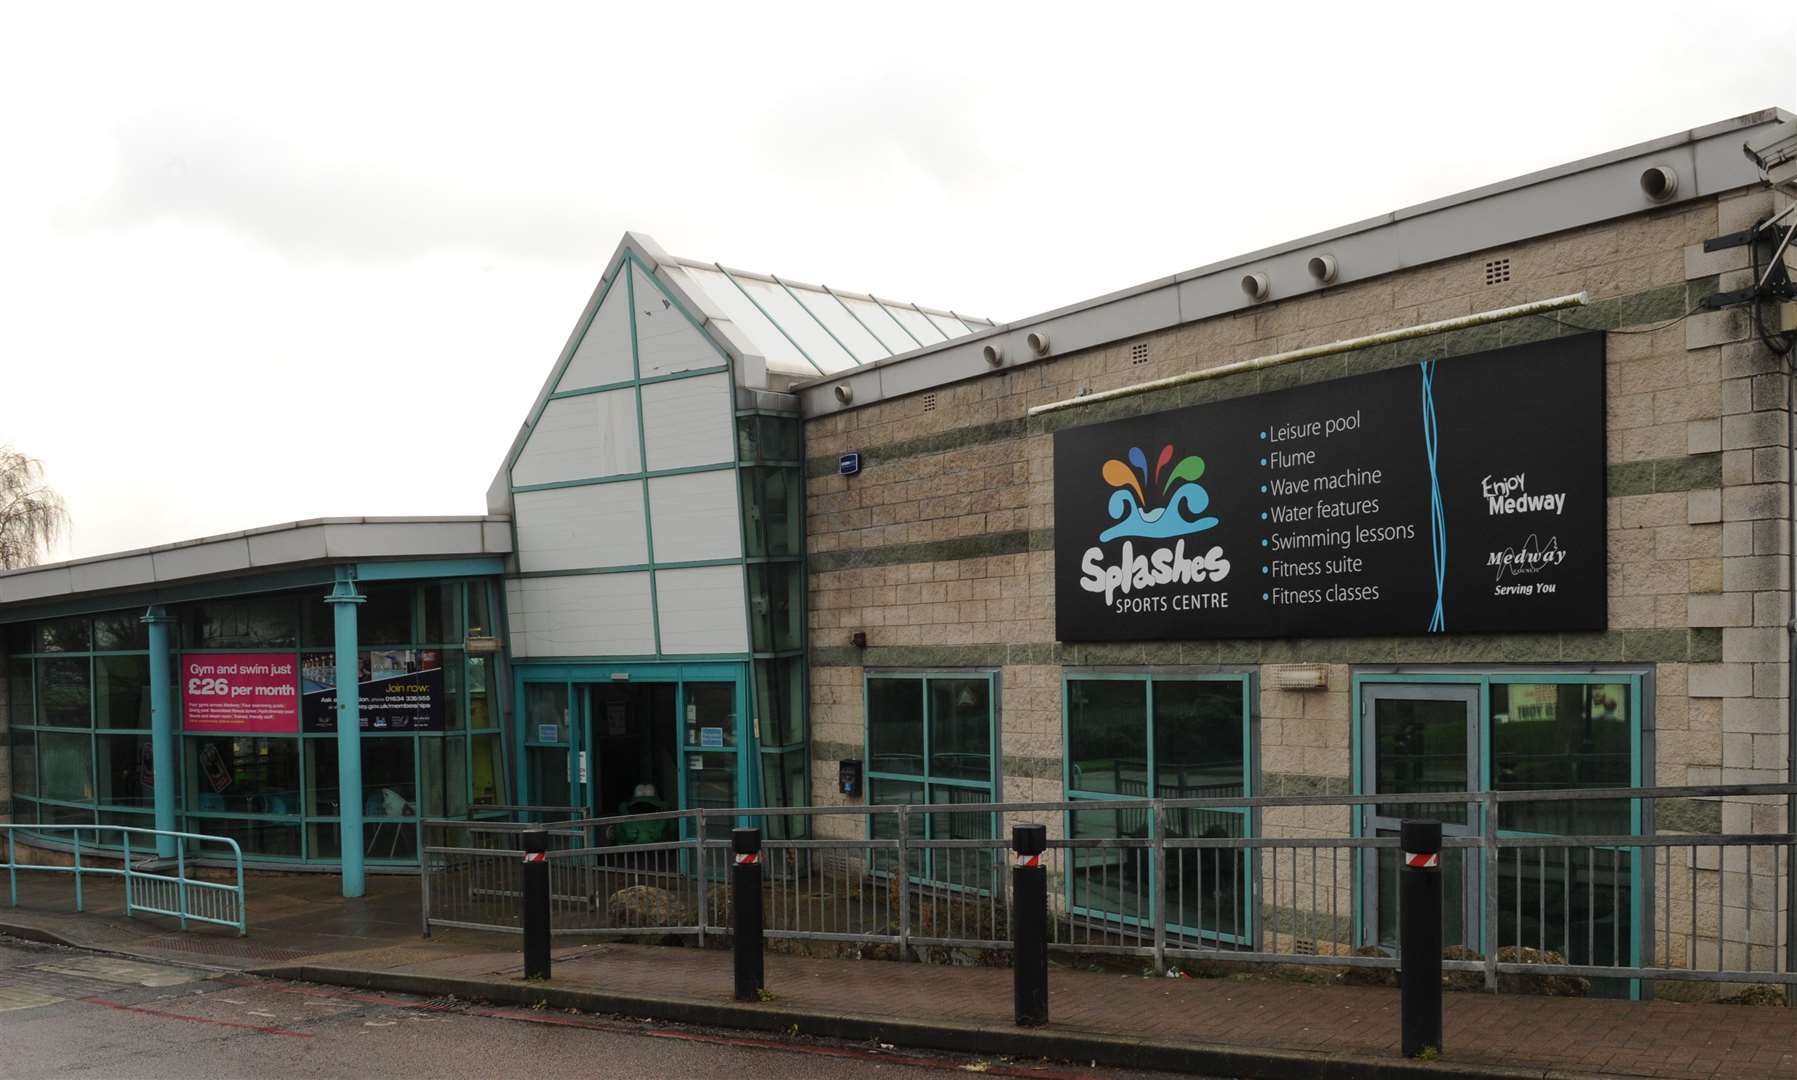 Staff have been made redundant at Splashes in Rainham while it undergoes a make-over. Picture: Steve Crispe